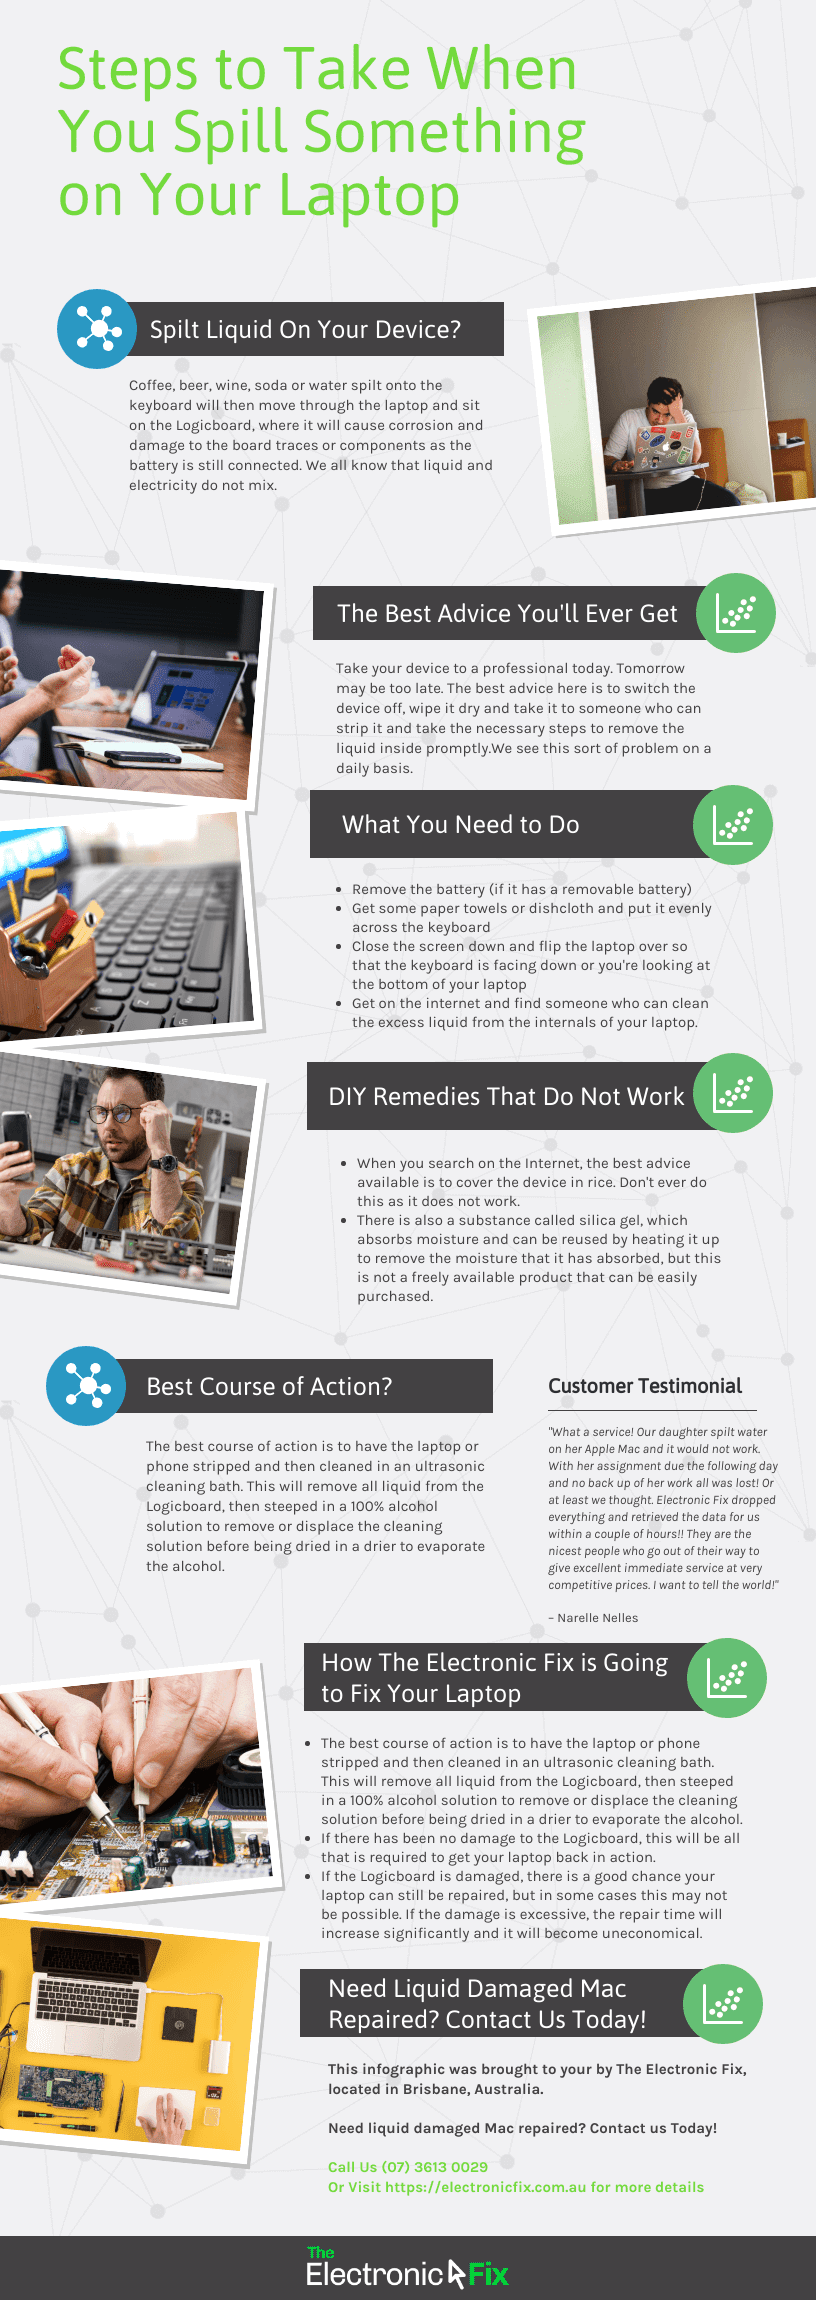 infographic about which steps to take when spill something on a laptop